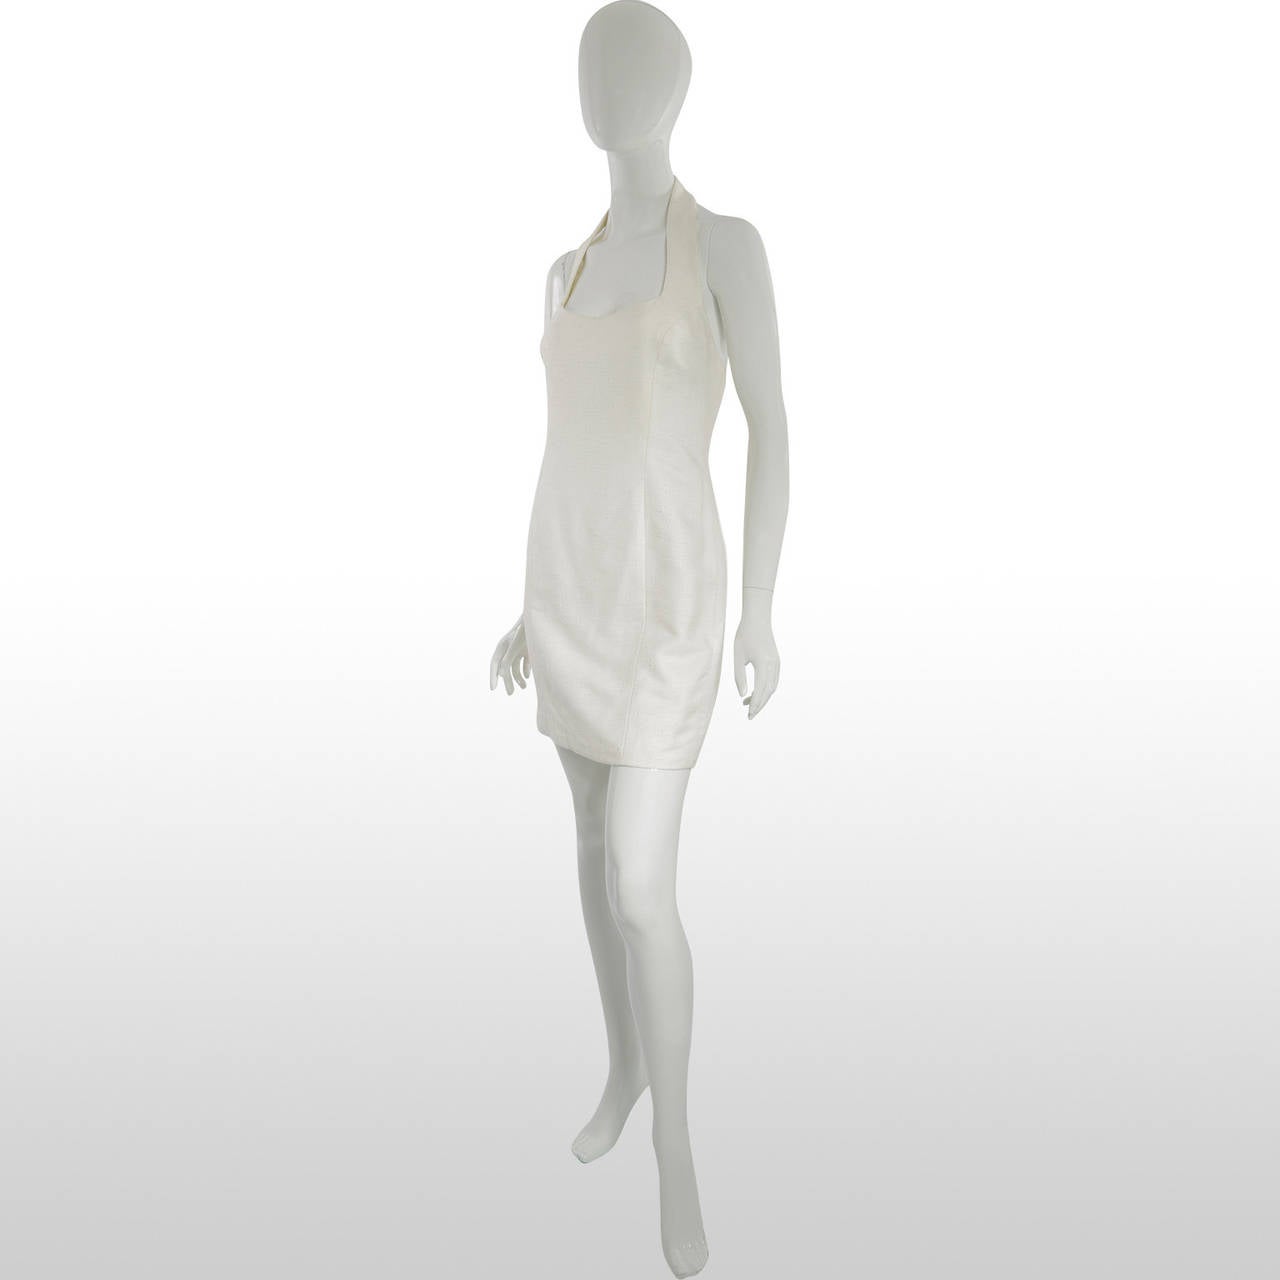 This 1990’s little white dress is custom made by British Designer Bruce Oldfield and is made from a woven textured linen. It has a fitted bodice which is structured with boning and the skirt fits to the hips in a straight fashion. The neckline is